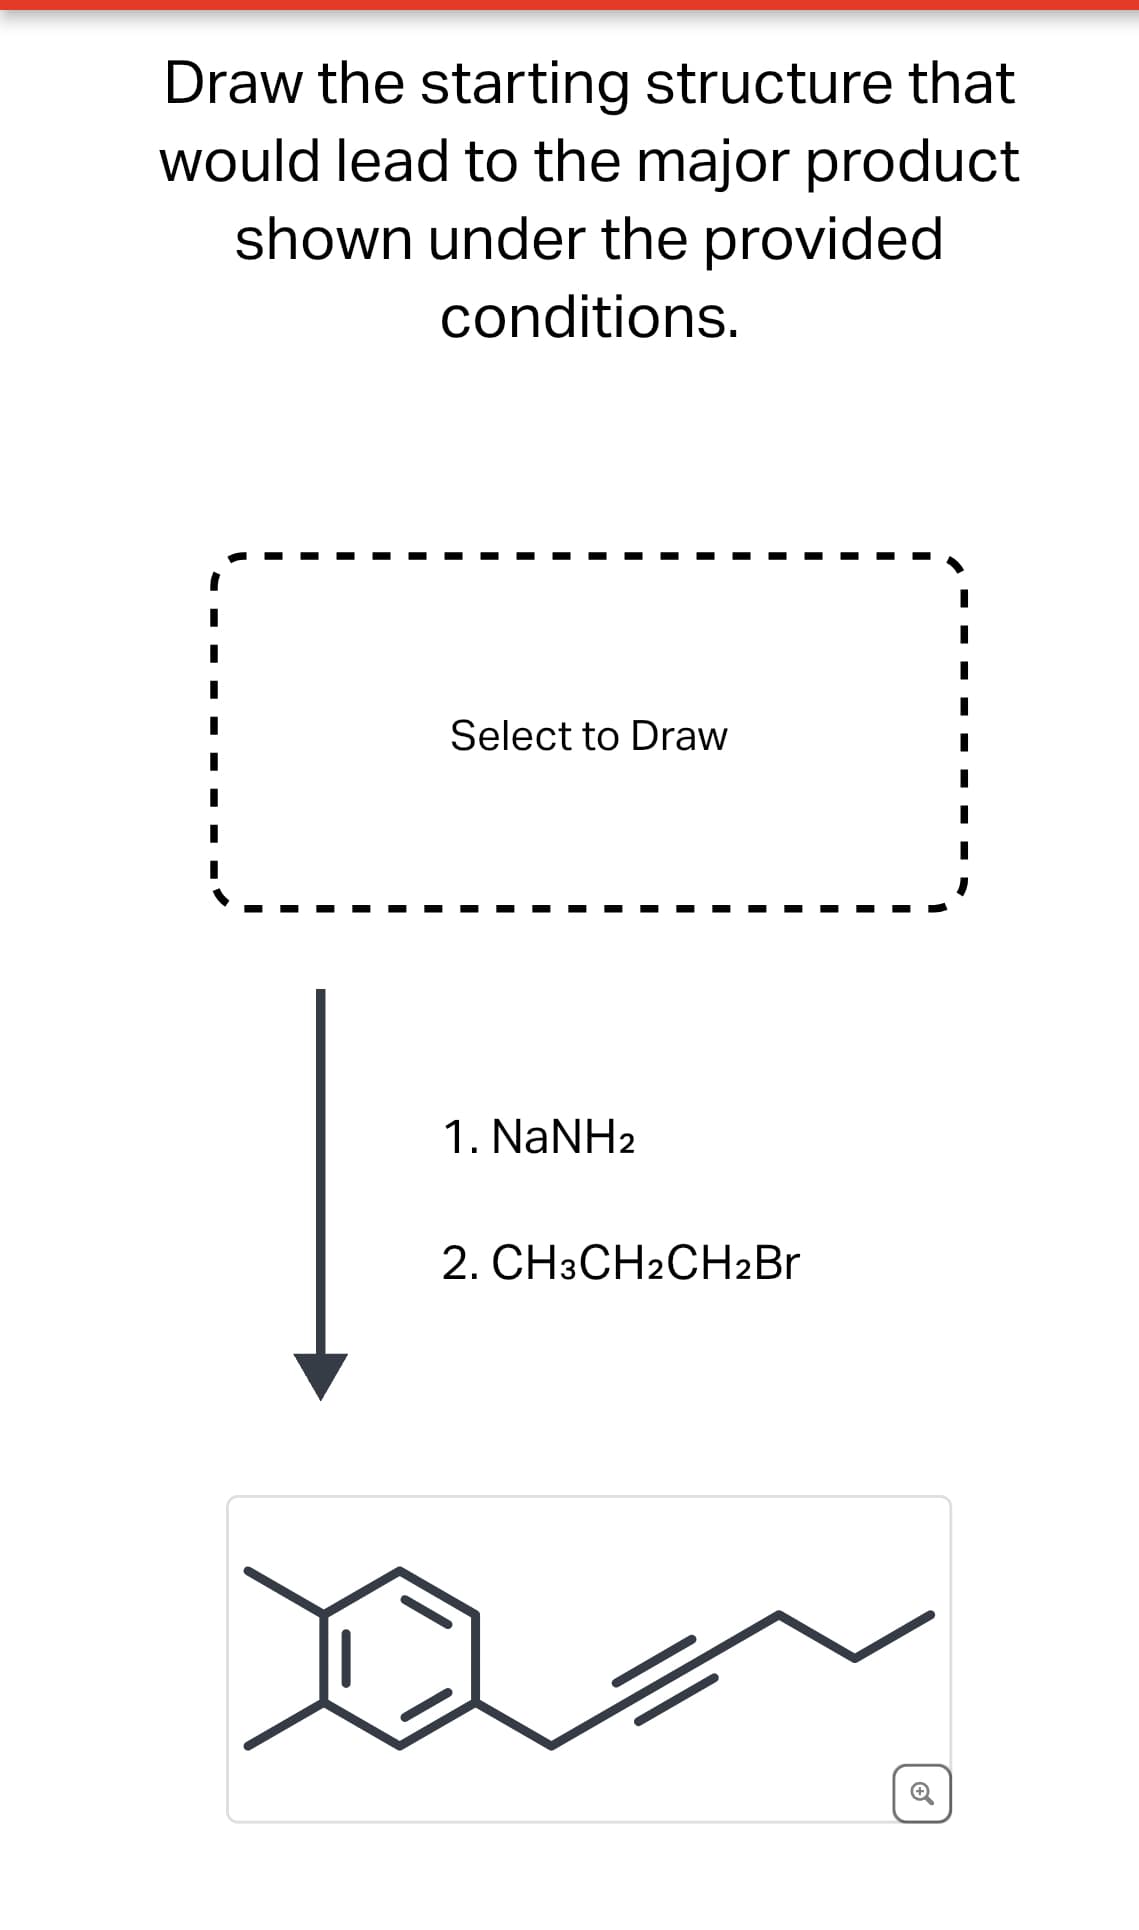 Draw the starting structure that
would lead to the major product
shown under the provided
conditions.
Select to Draw
1. NaNH2
2. CH3CH2CH2Br